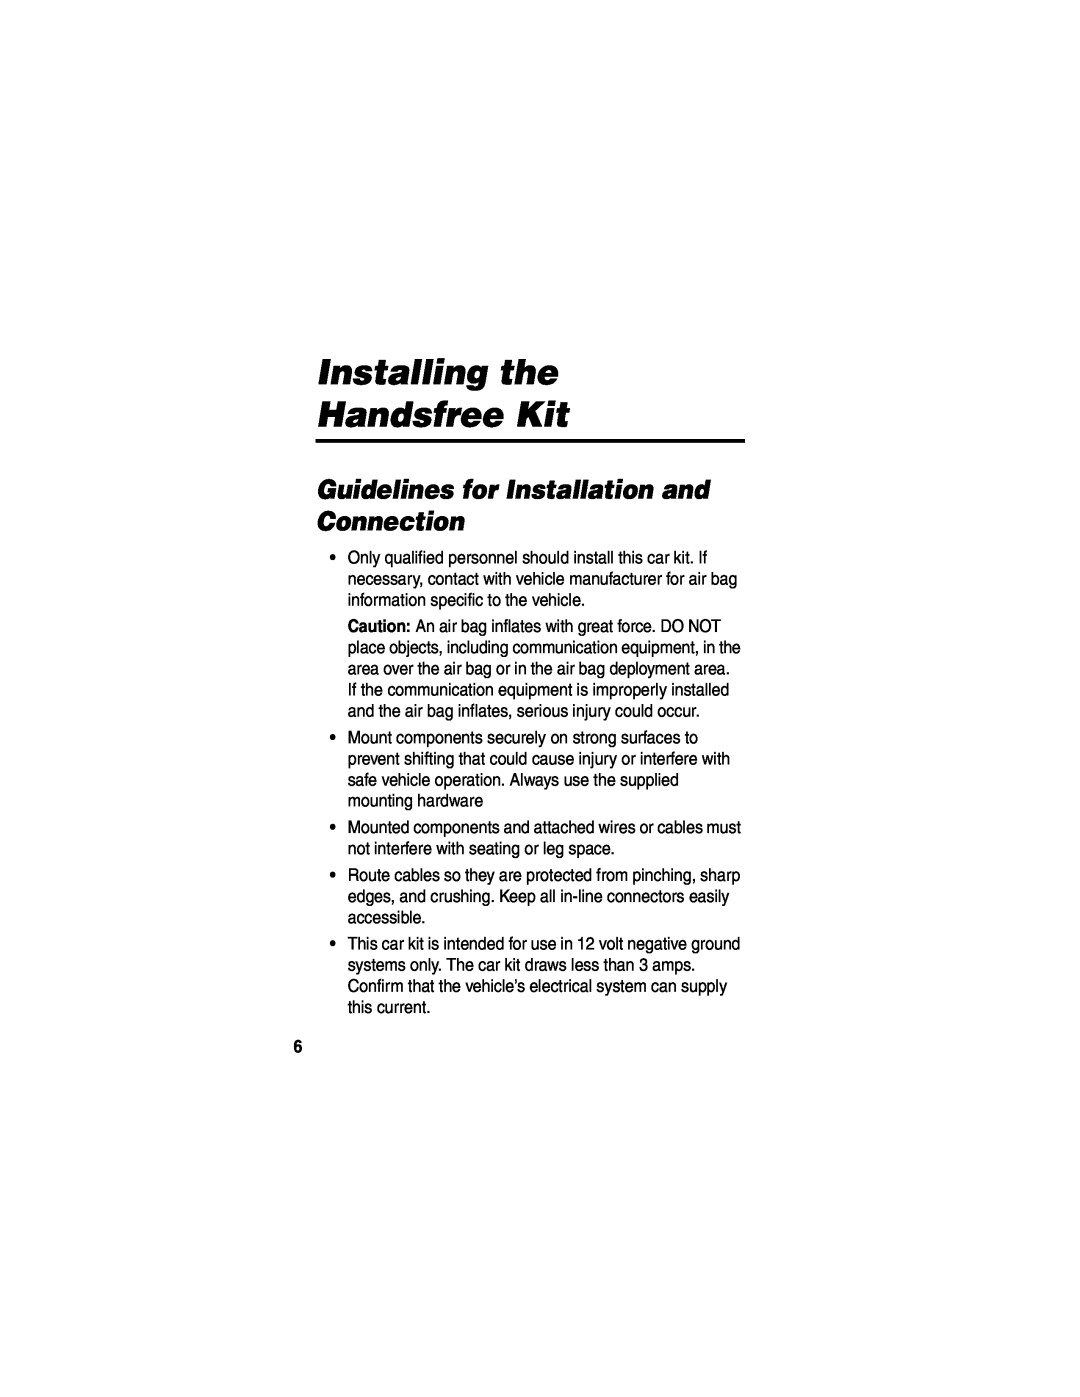 Motorola HF850 manual Installing the Handsfree Kit, Guidelines for Installation and Connection 